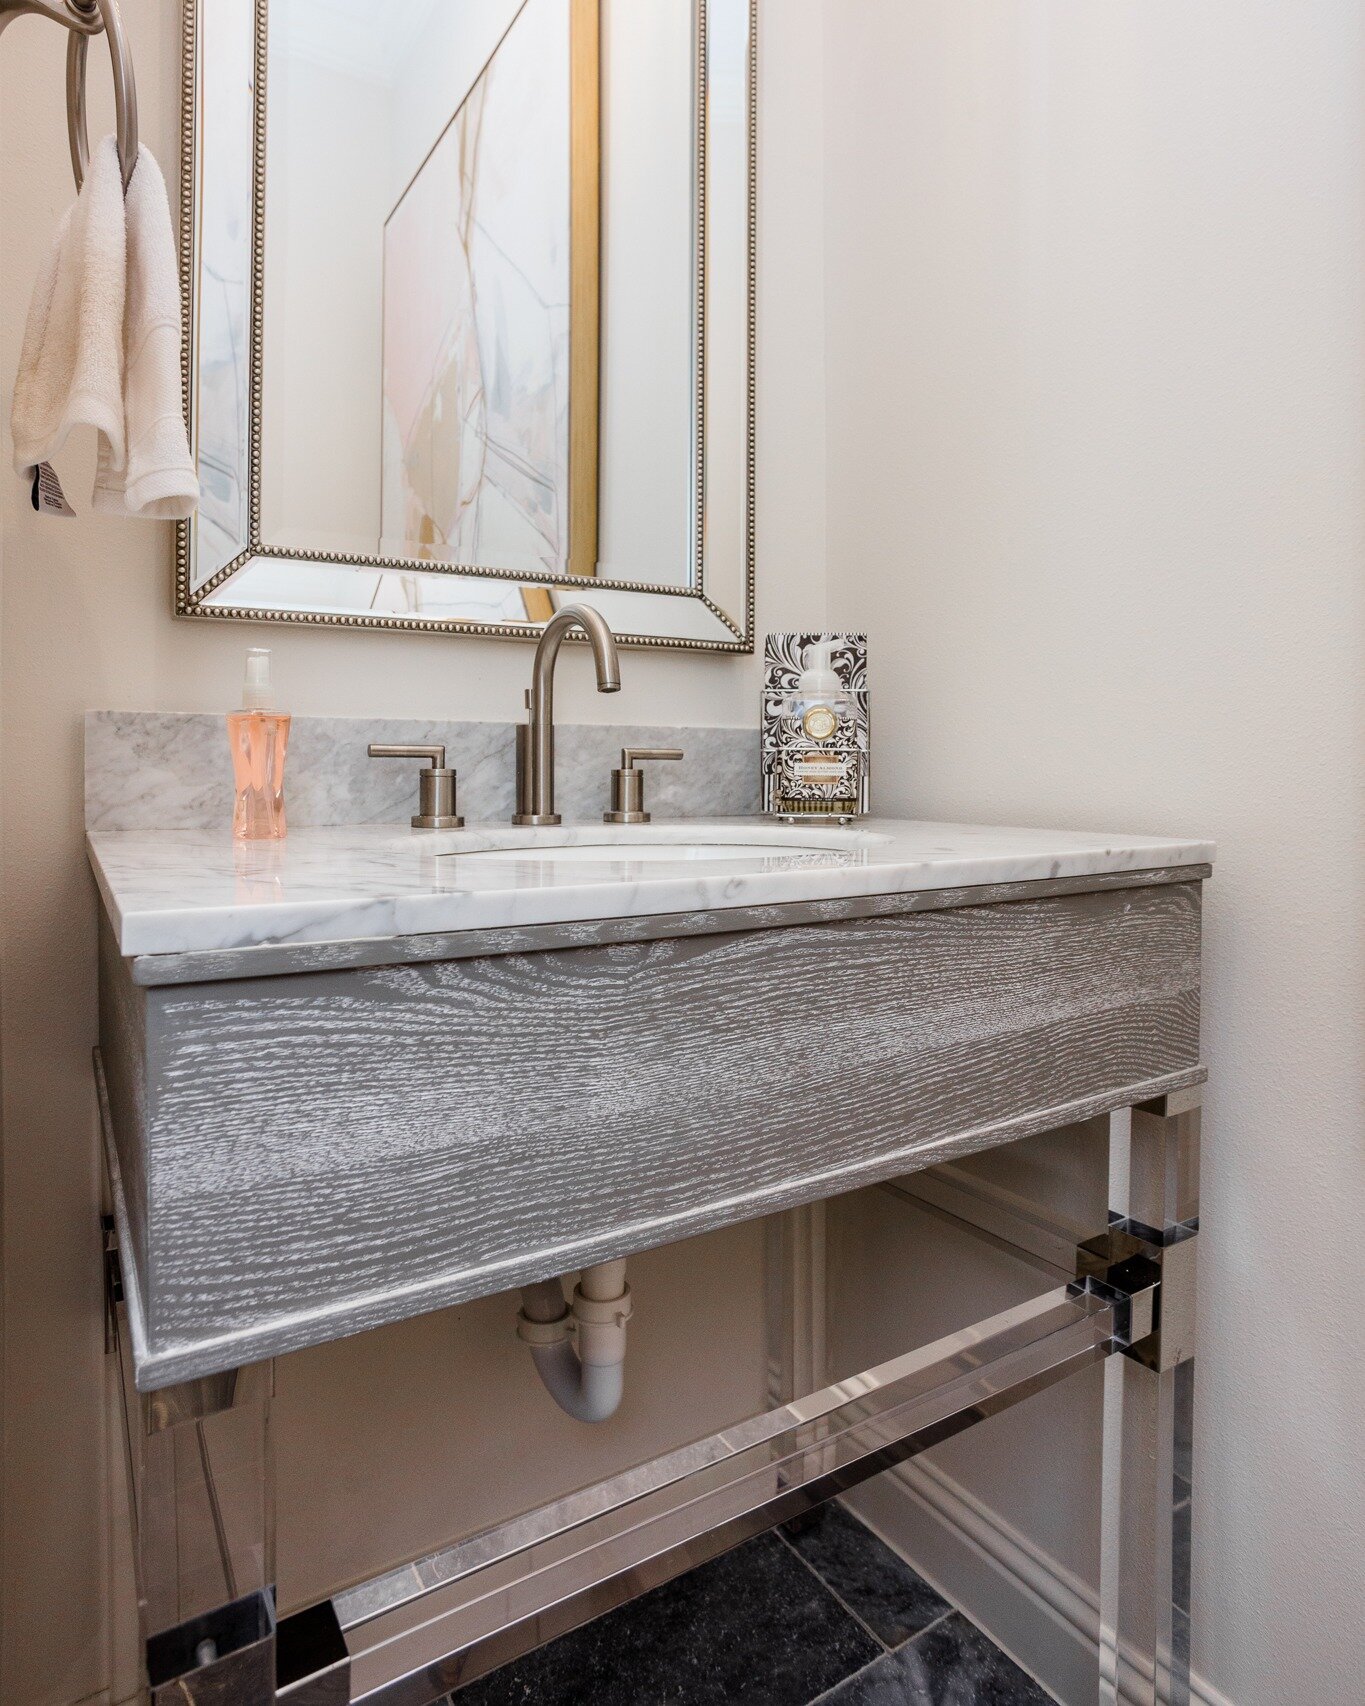 Lavish Lucite. A refresh on the traditional powder bathroom design by mixing in modern features. ✨
.
.
.
#thedesignsource #thedesignsourcesl #christmasdecor #sugarlandtx #houstoninteriordesigns #luxurydesign #timelessinteriors #luciteluxury #powderba